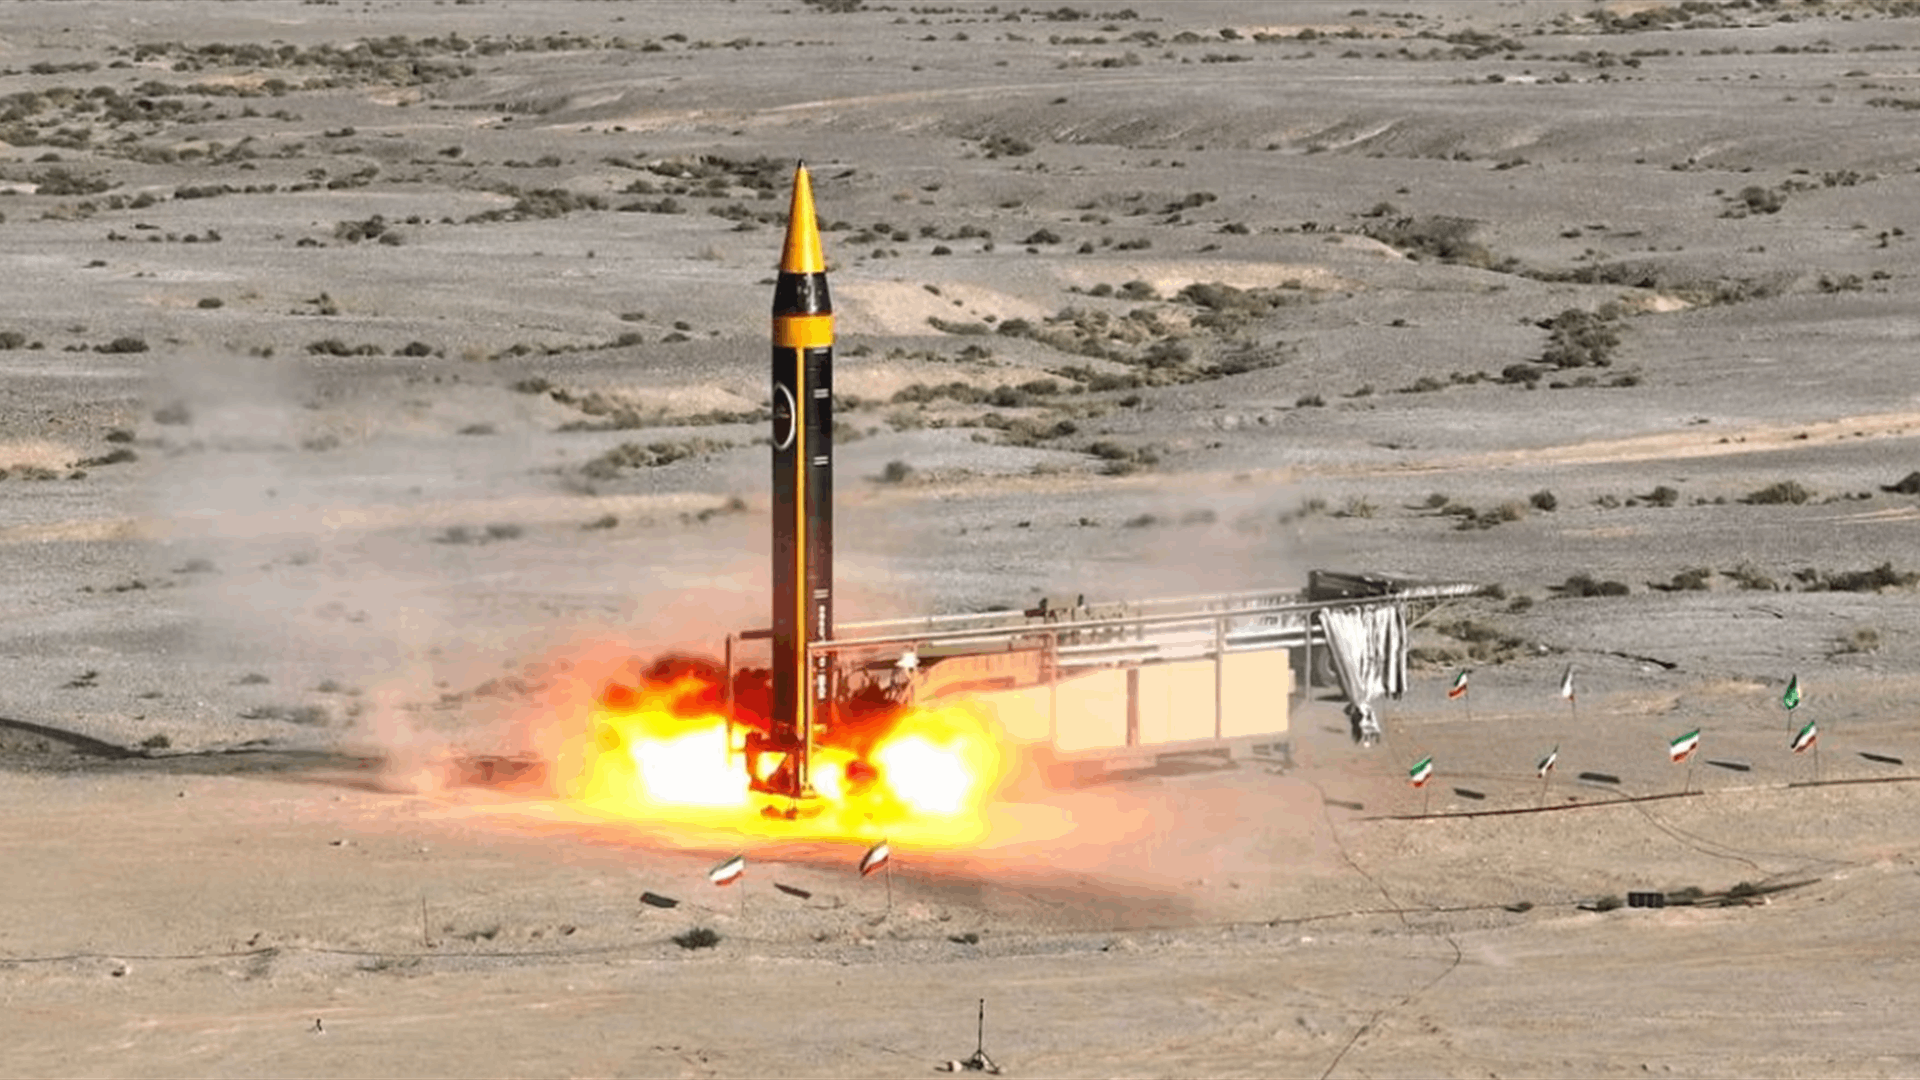 Iran says it has successfully launched ballistic missile